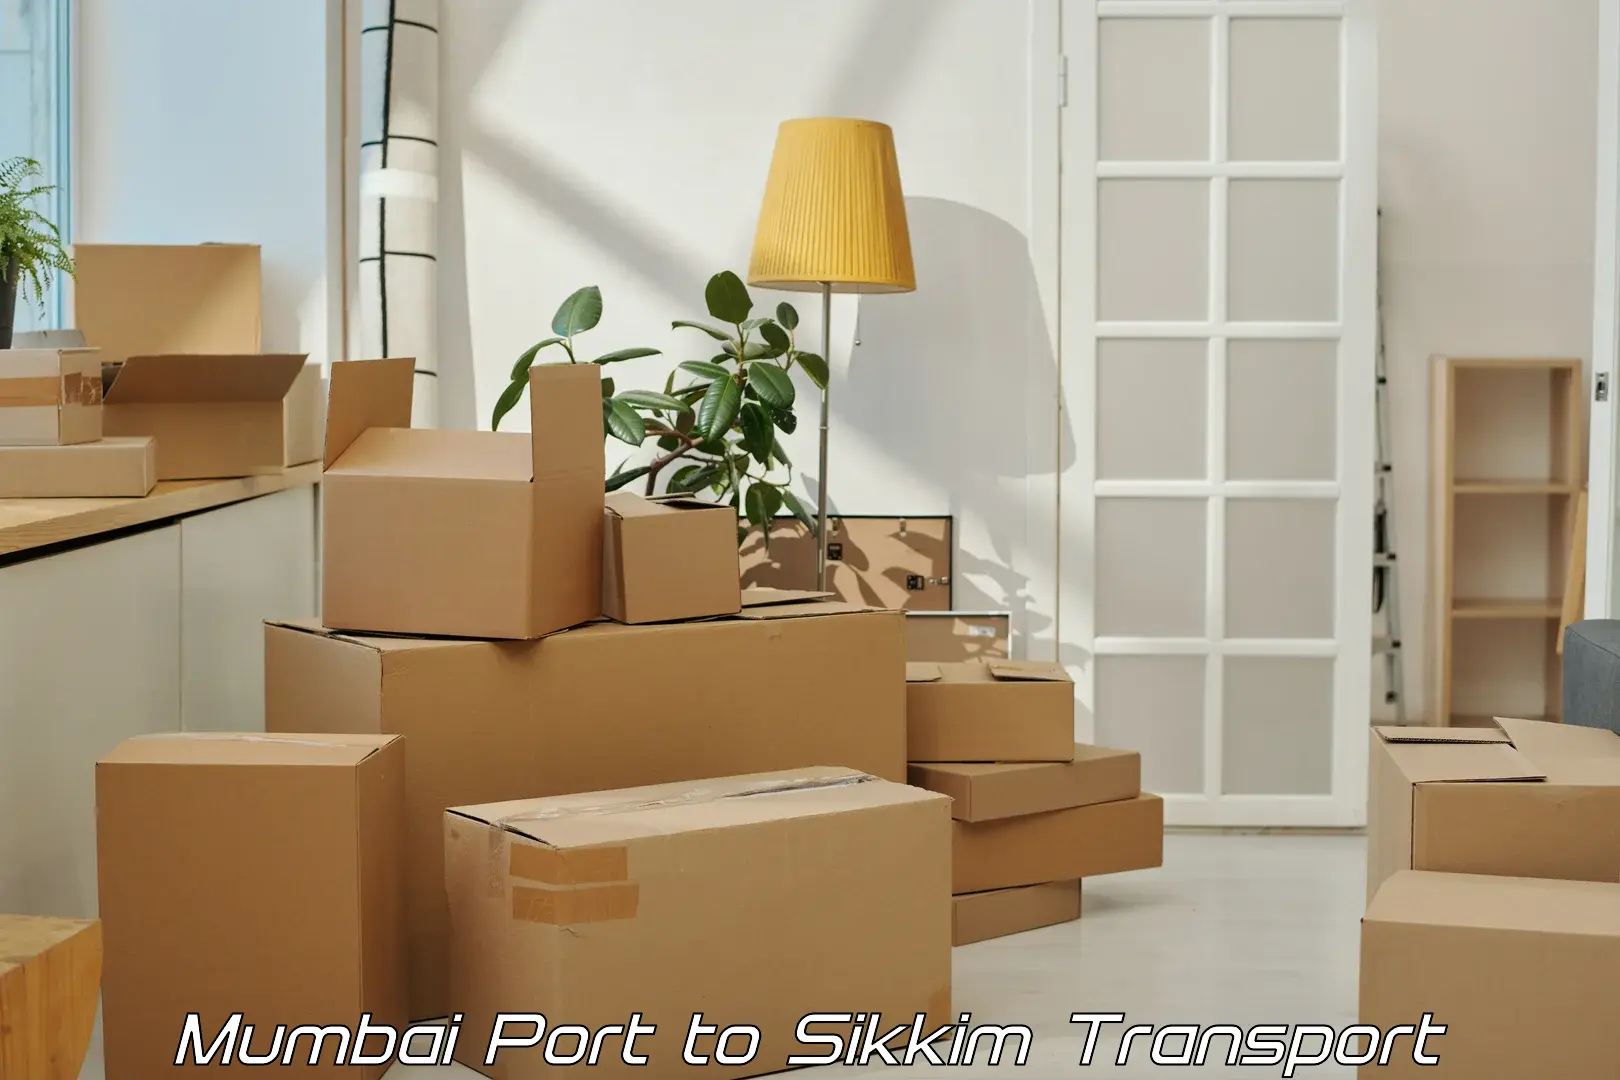 Vehicle courier services in Mumbai Port to Sikkim